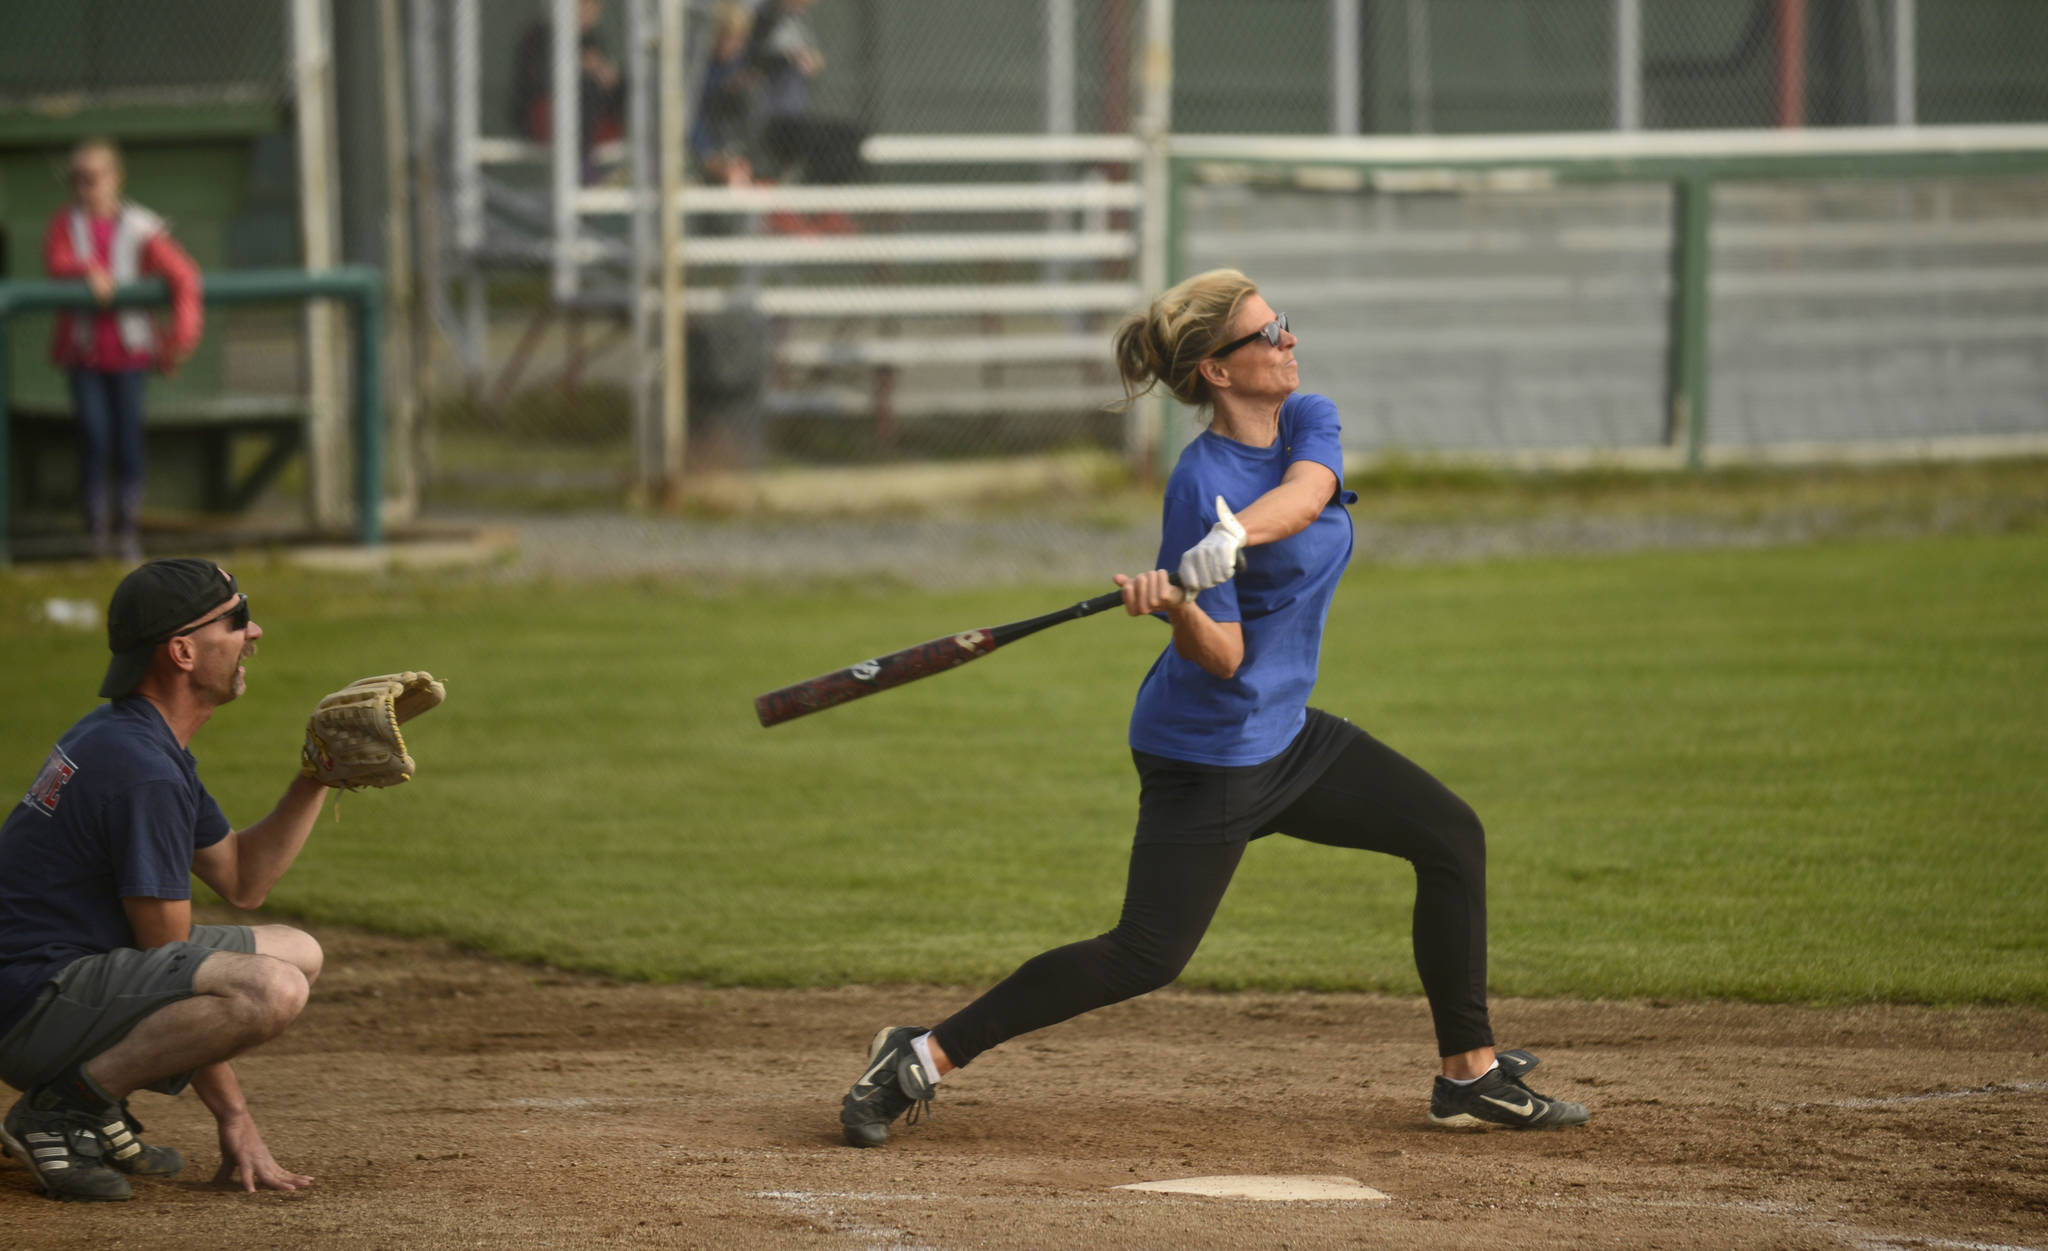 With Central Emergency Services’ Shawn Killian playing catcher, Soldotna Police Department disapatcher Tammy Goggia swings at an oncoming ball during a charity softball game for the Nikiski Children’s Fund between local law enforcers and firefighters on Thursday, August 18 at Kenai’s Oiler’s Field. Law enforcement won the game 17-7, but made no arrests for stolen bases. The Nikiski Children’s Fund, founded last year by Carlee Rizzo, makes money available to to teachers and other community members to fill needs they see for local children. Rizzo said the group has more fundraisers planned for the future, such as a show in September by the rock trio No Small Children.